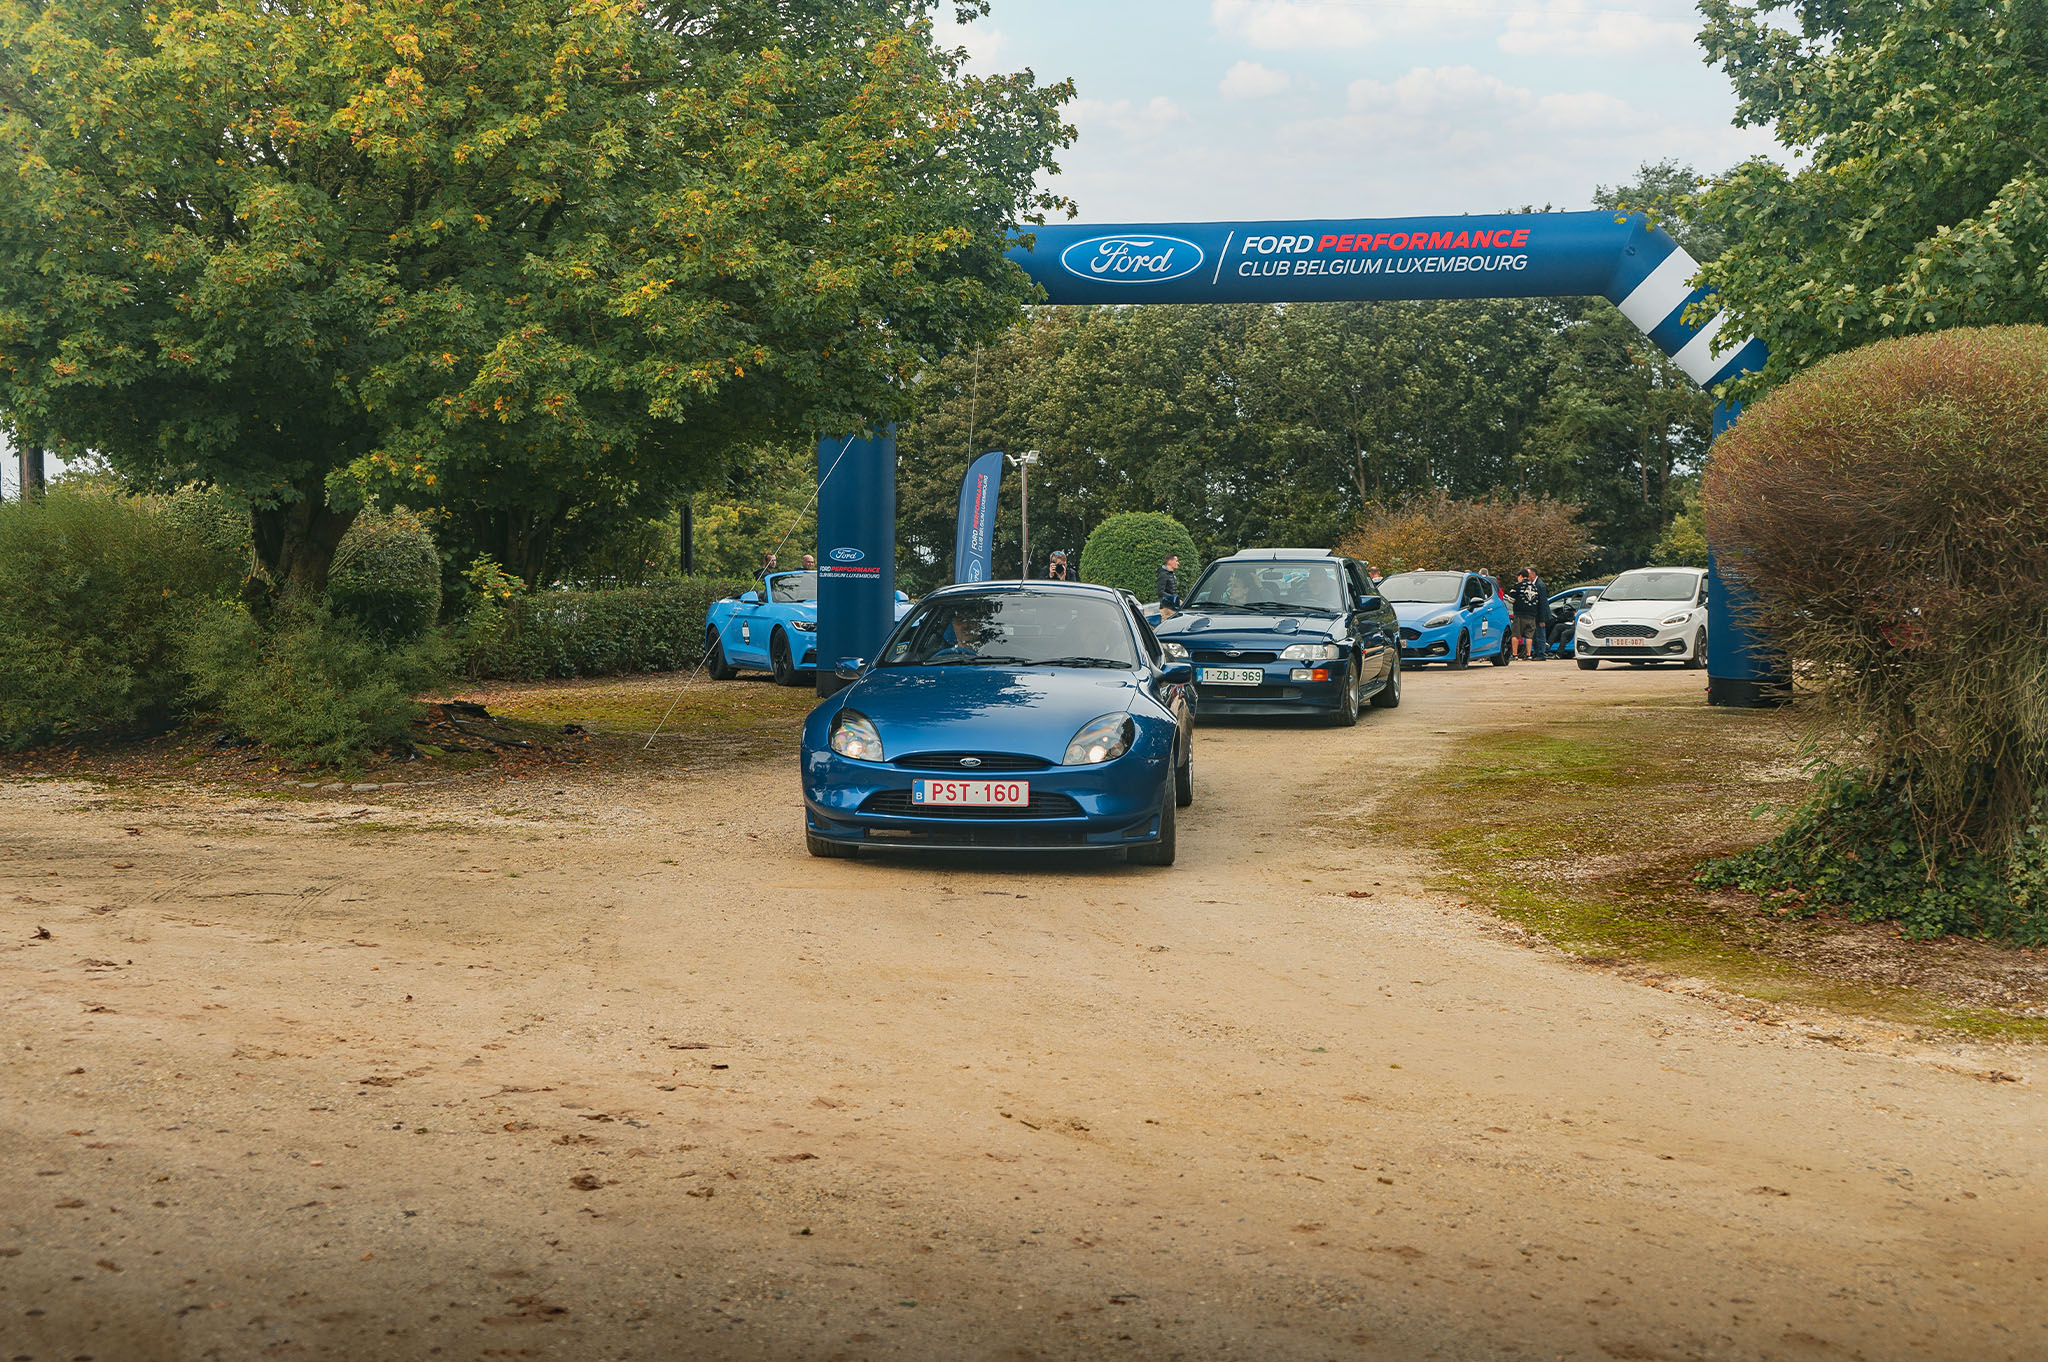 Ford Performance Grand Tour 2021